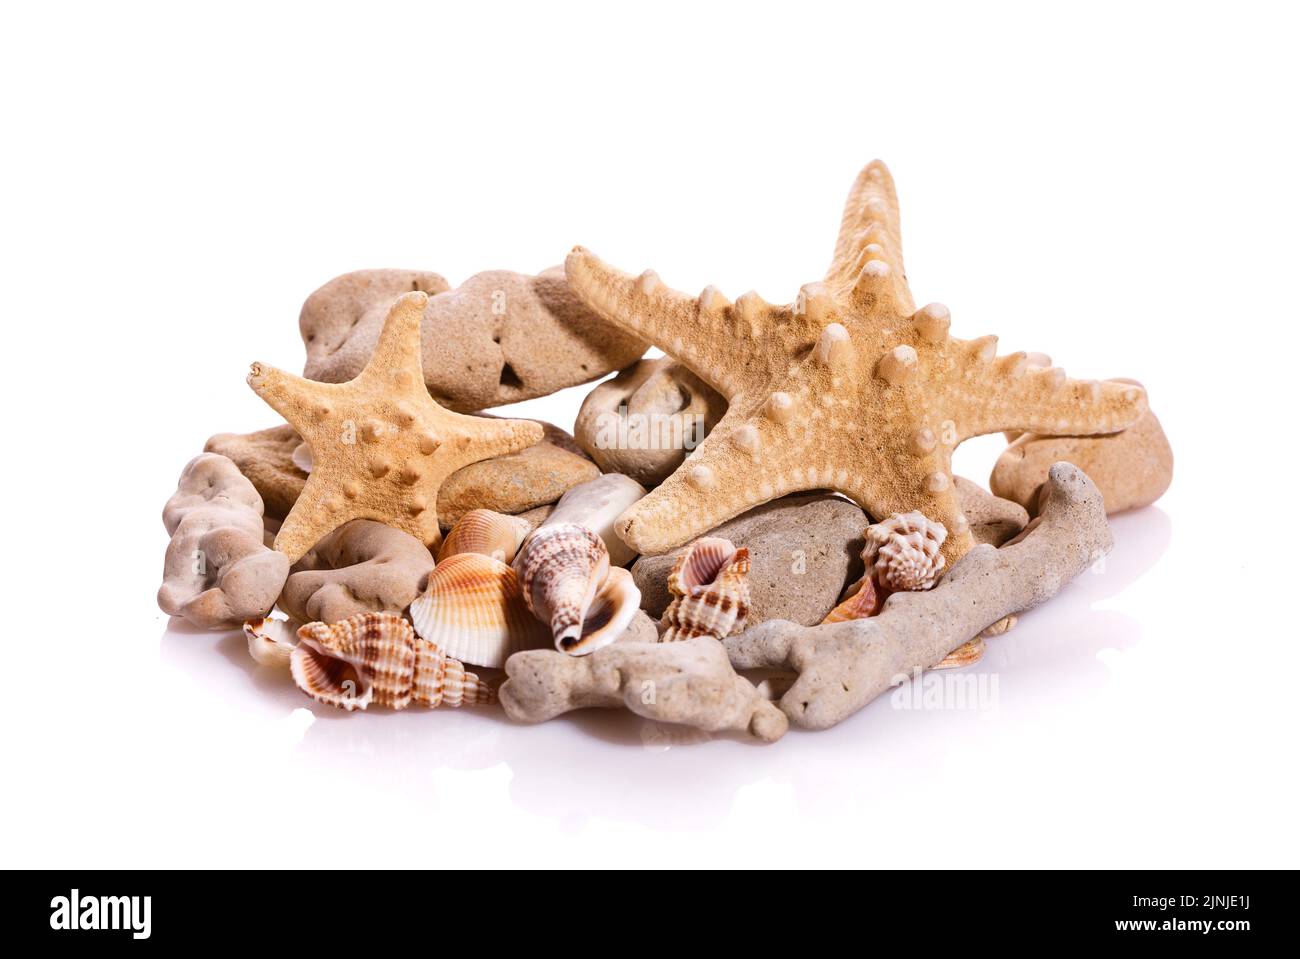 Some shells from the ocean isolated on white background. Natural materials. Stock Photo